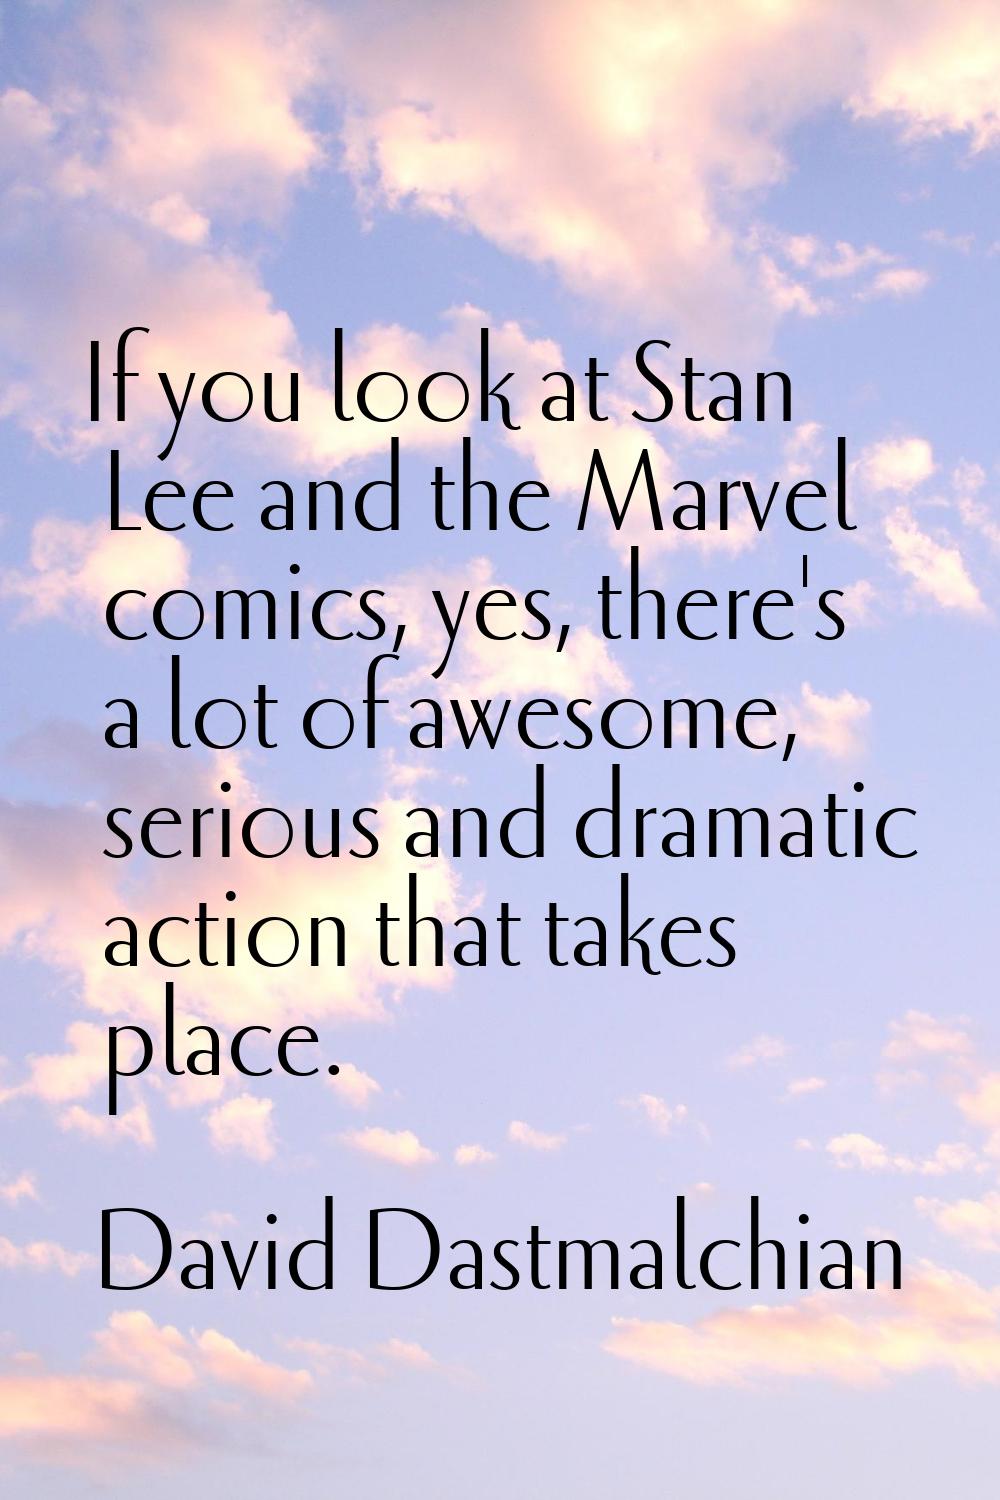 If you look at Stan Lee and the Marvel comics, yes, there's a lot of awesome, serious and dramatic 